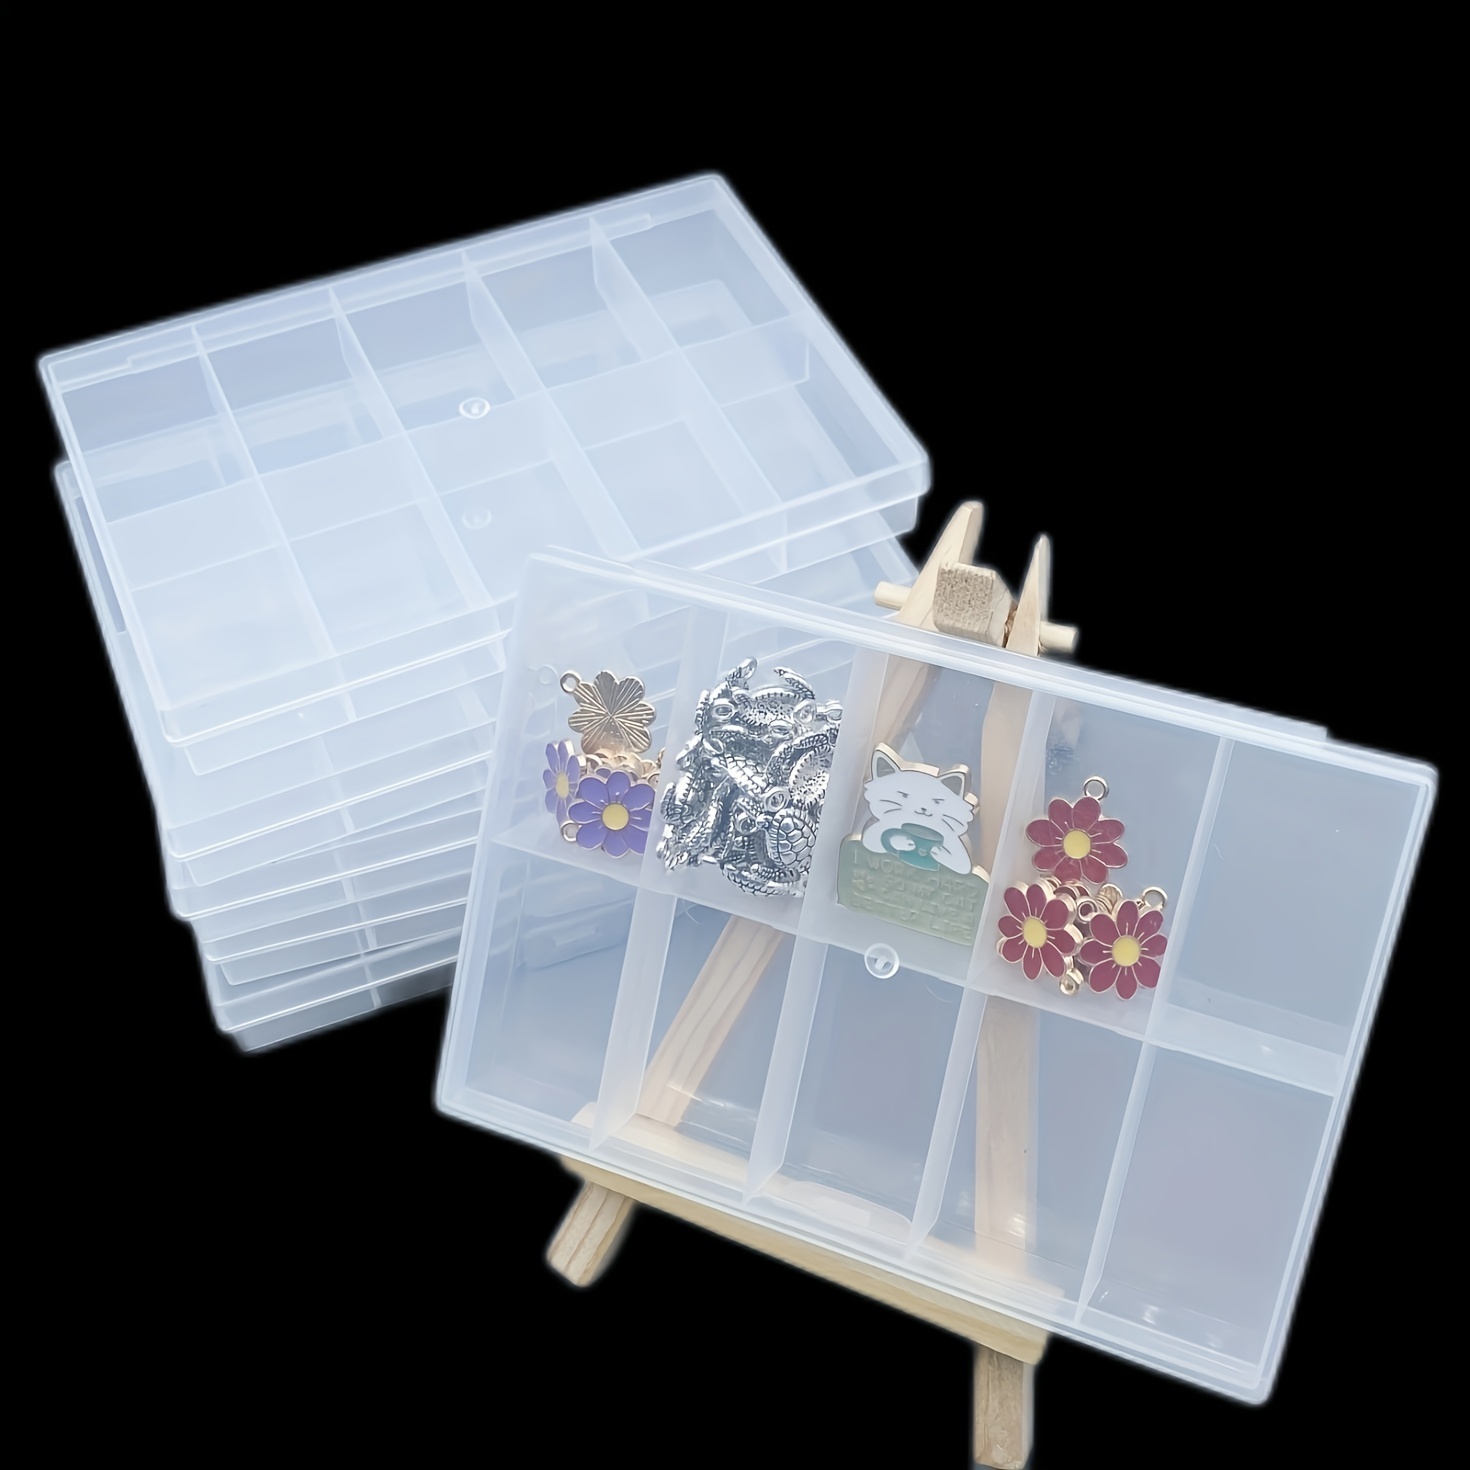  4PCS Clear White Plastic Organizer Box with Dividers 24 Grid  Storage Containers Jewelry Storage Box with Dividers for Beads Earrings  Necklaces Rings Metal Parts Accessories Screws Button Storage : Arts, Crafts